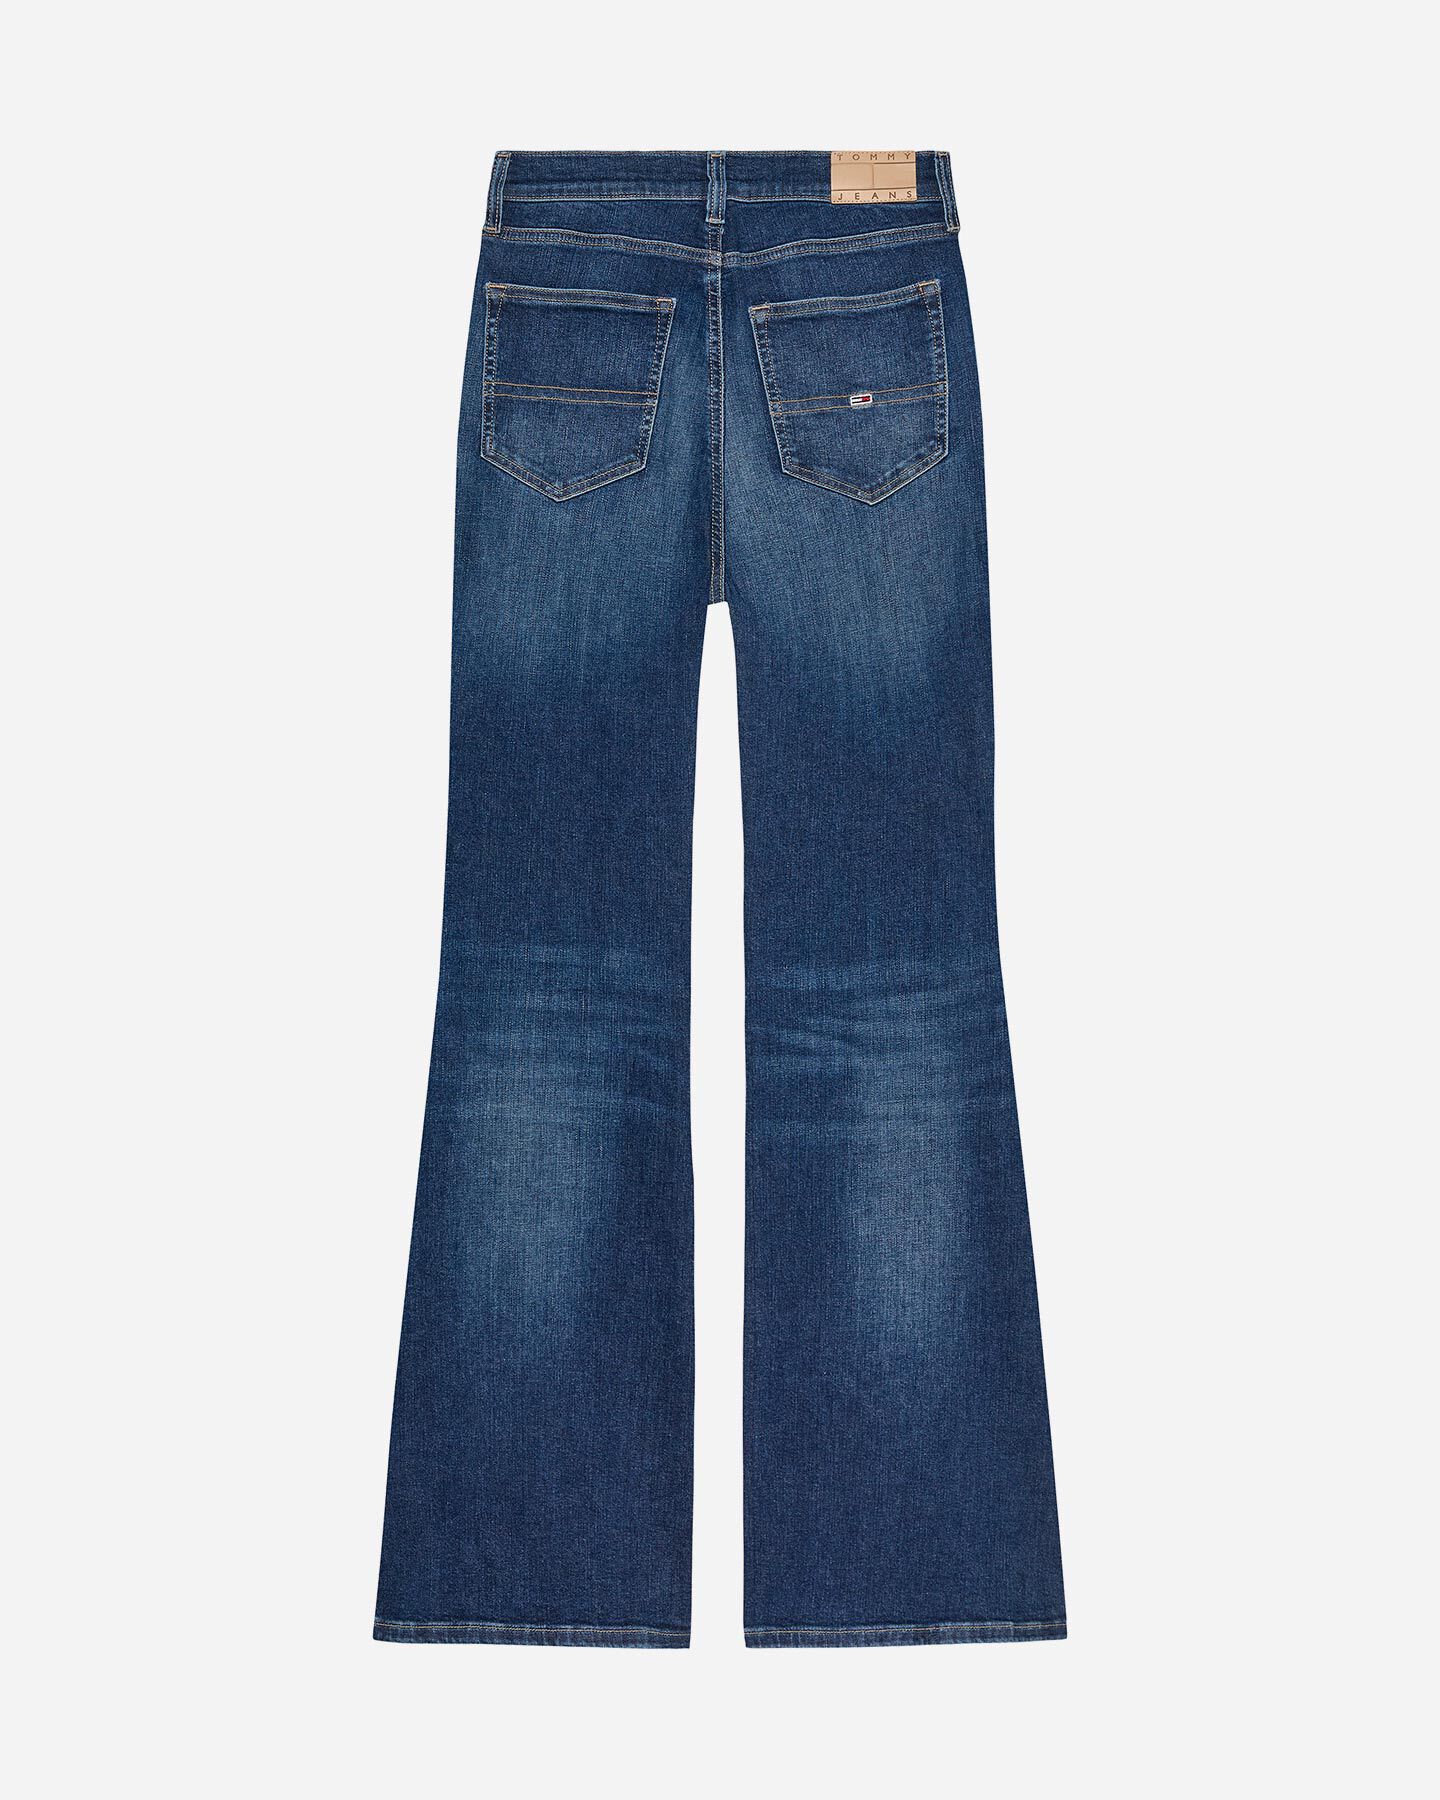  Jeans TOMMY HILFIGER SYLVIA L32 BOOTCUT W S5686211|UNI|32/26 scatto 1